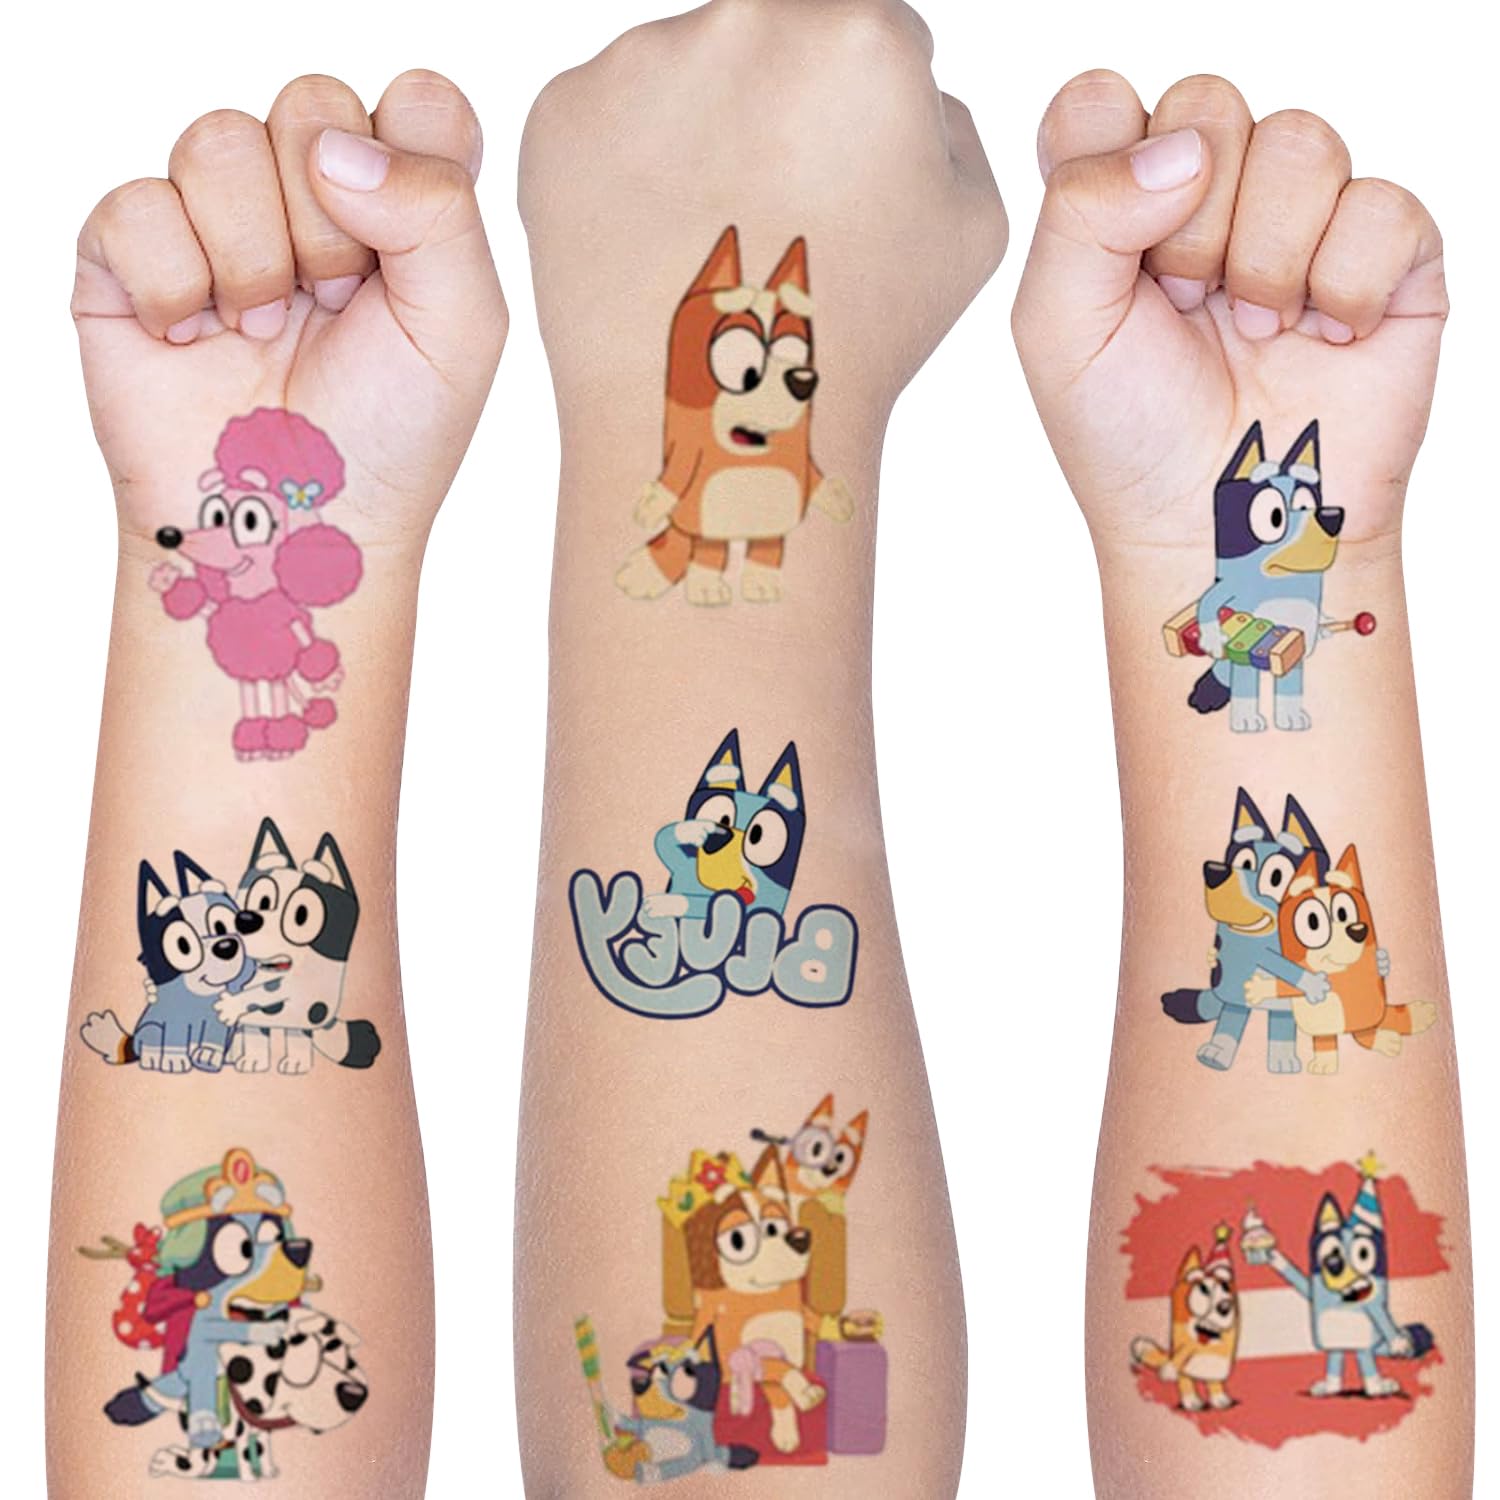 8 Sheets Temporary Tattoos for Kids, Party Favors Fake Tattoos Stickers Birthday Party Supplies Birthday Decorations Party Game Activities Reward Gifts